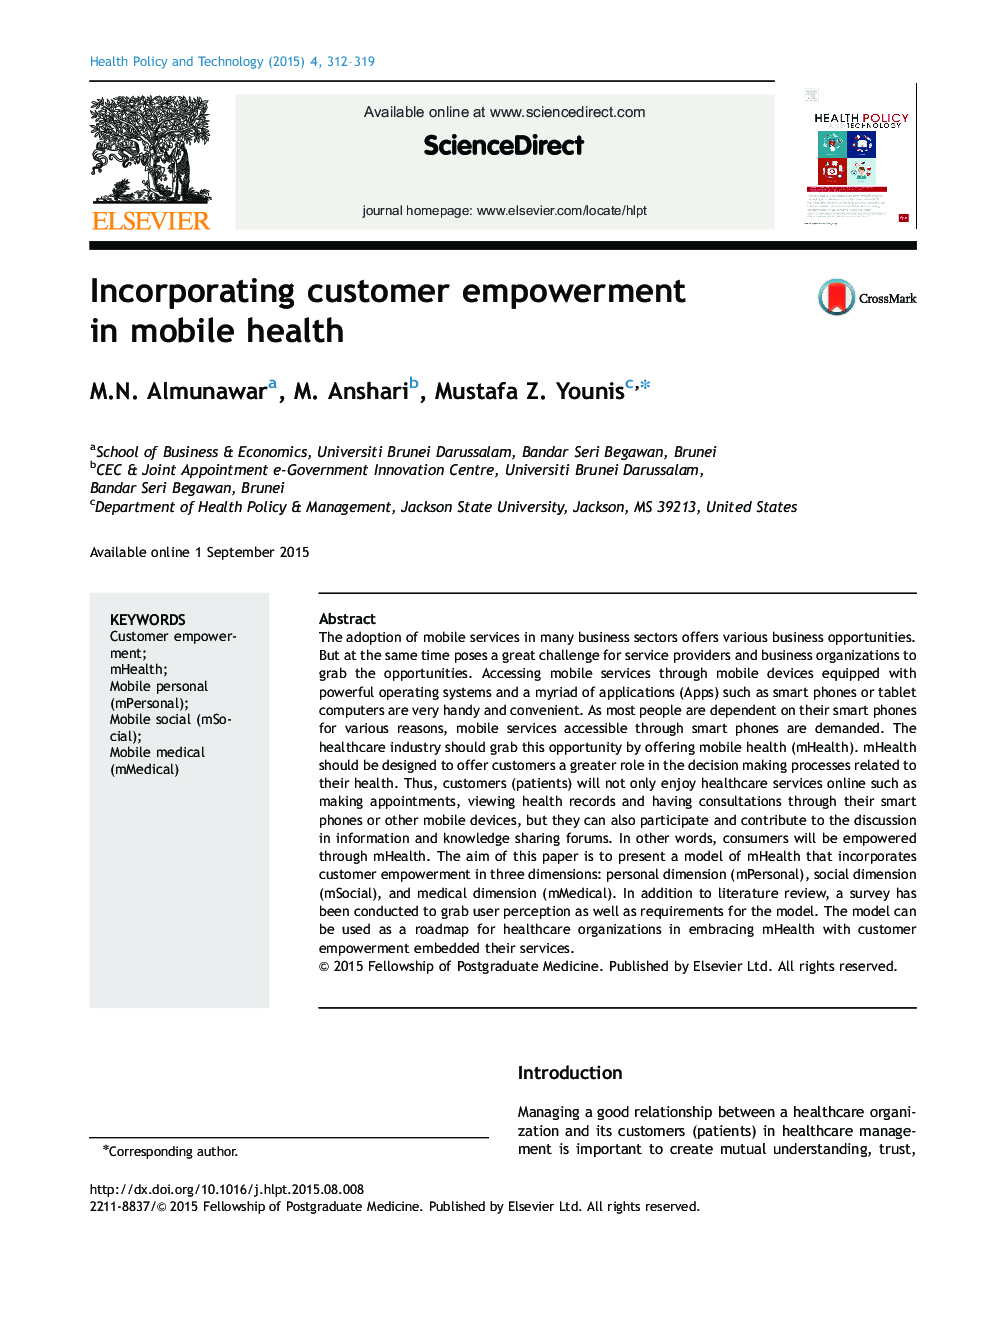 Incorporating customer empowerment in mobile health